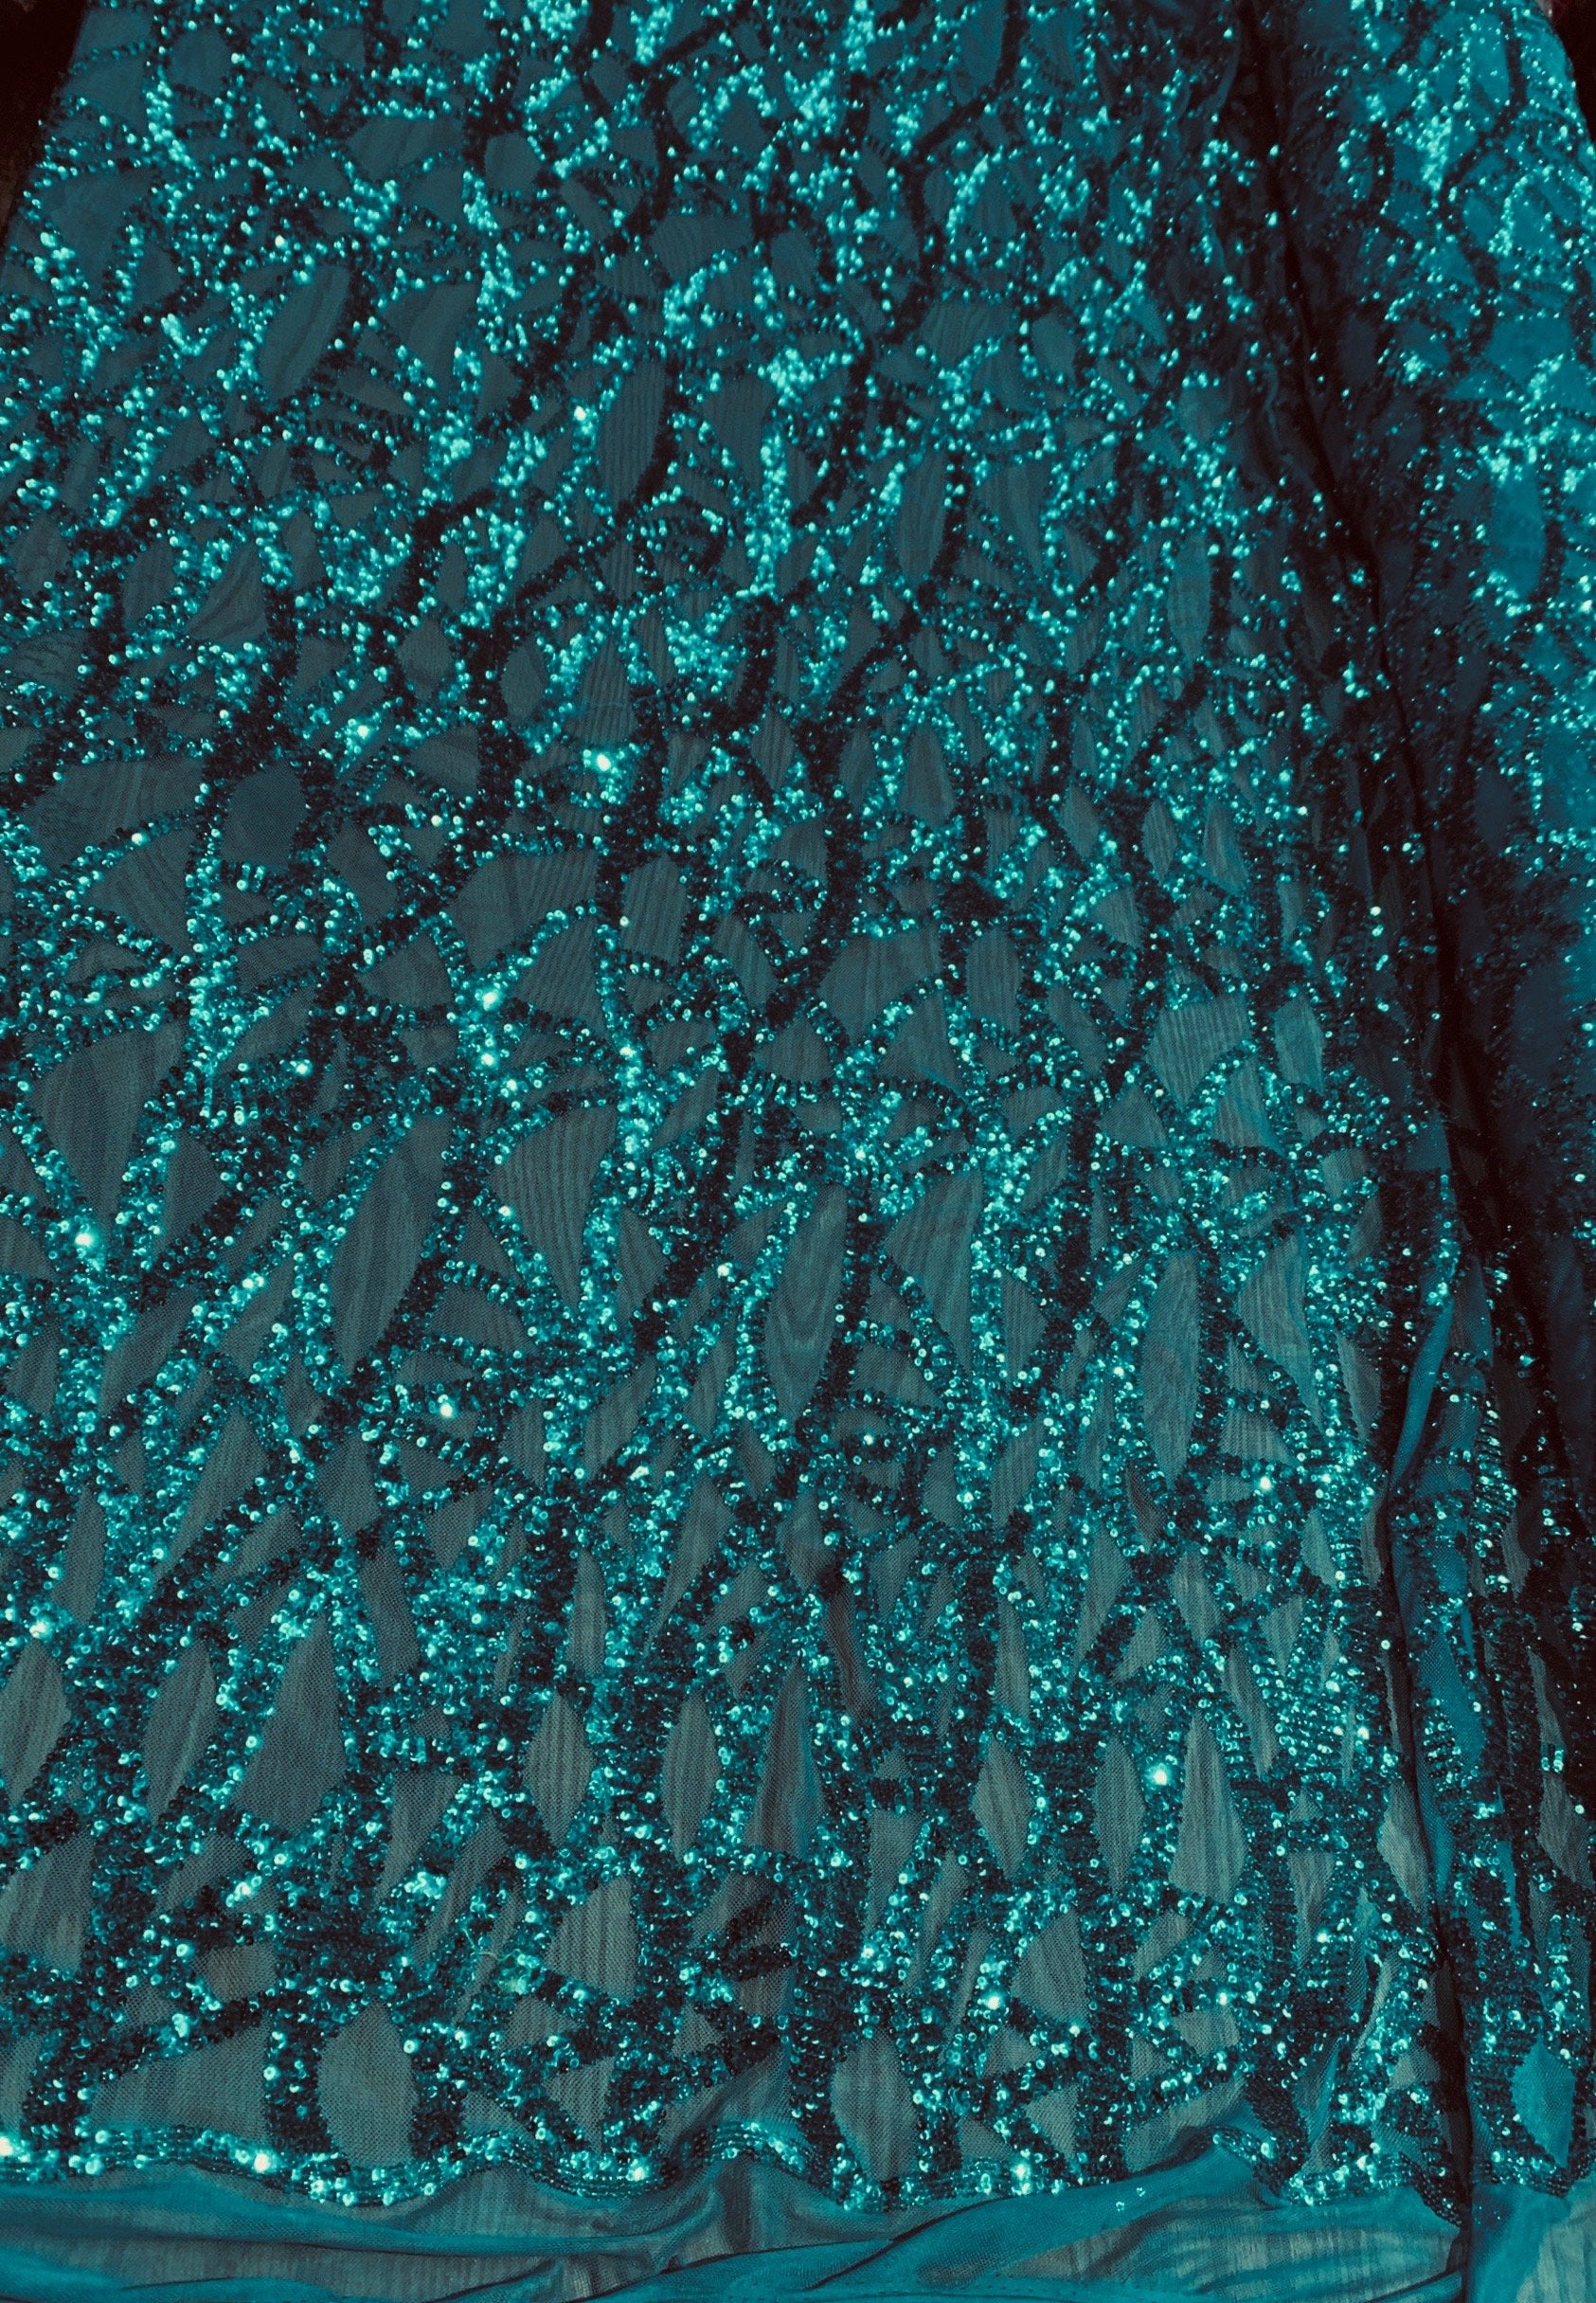 Celeste TEAL Sequins on Mesh Lace Fabric by the Yard - 10134